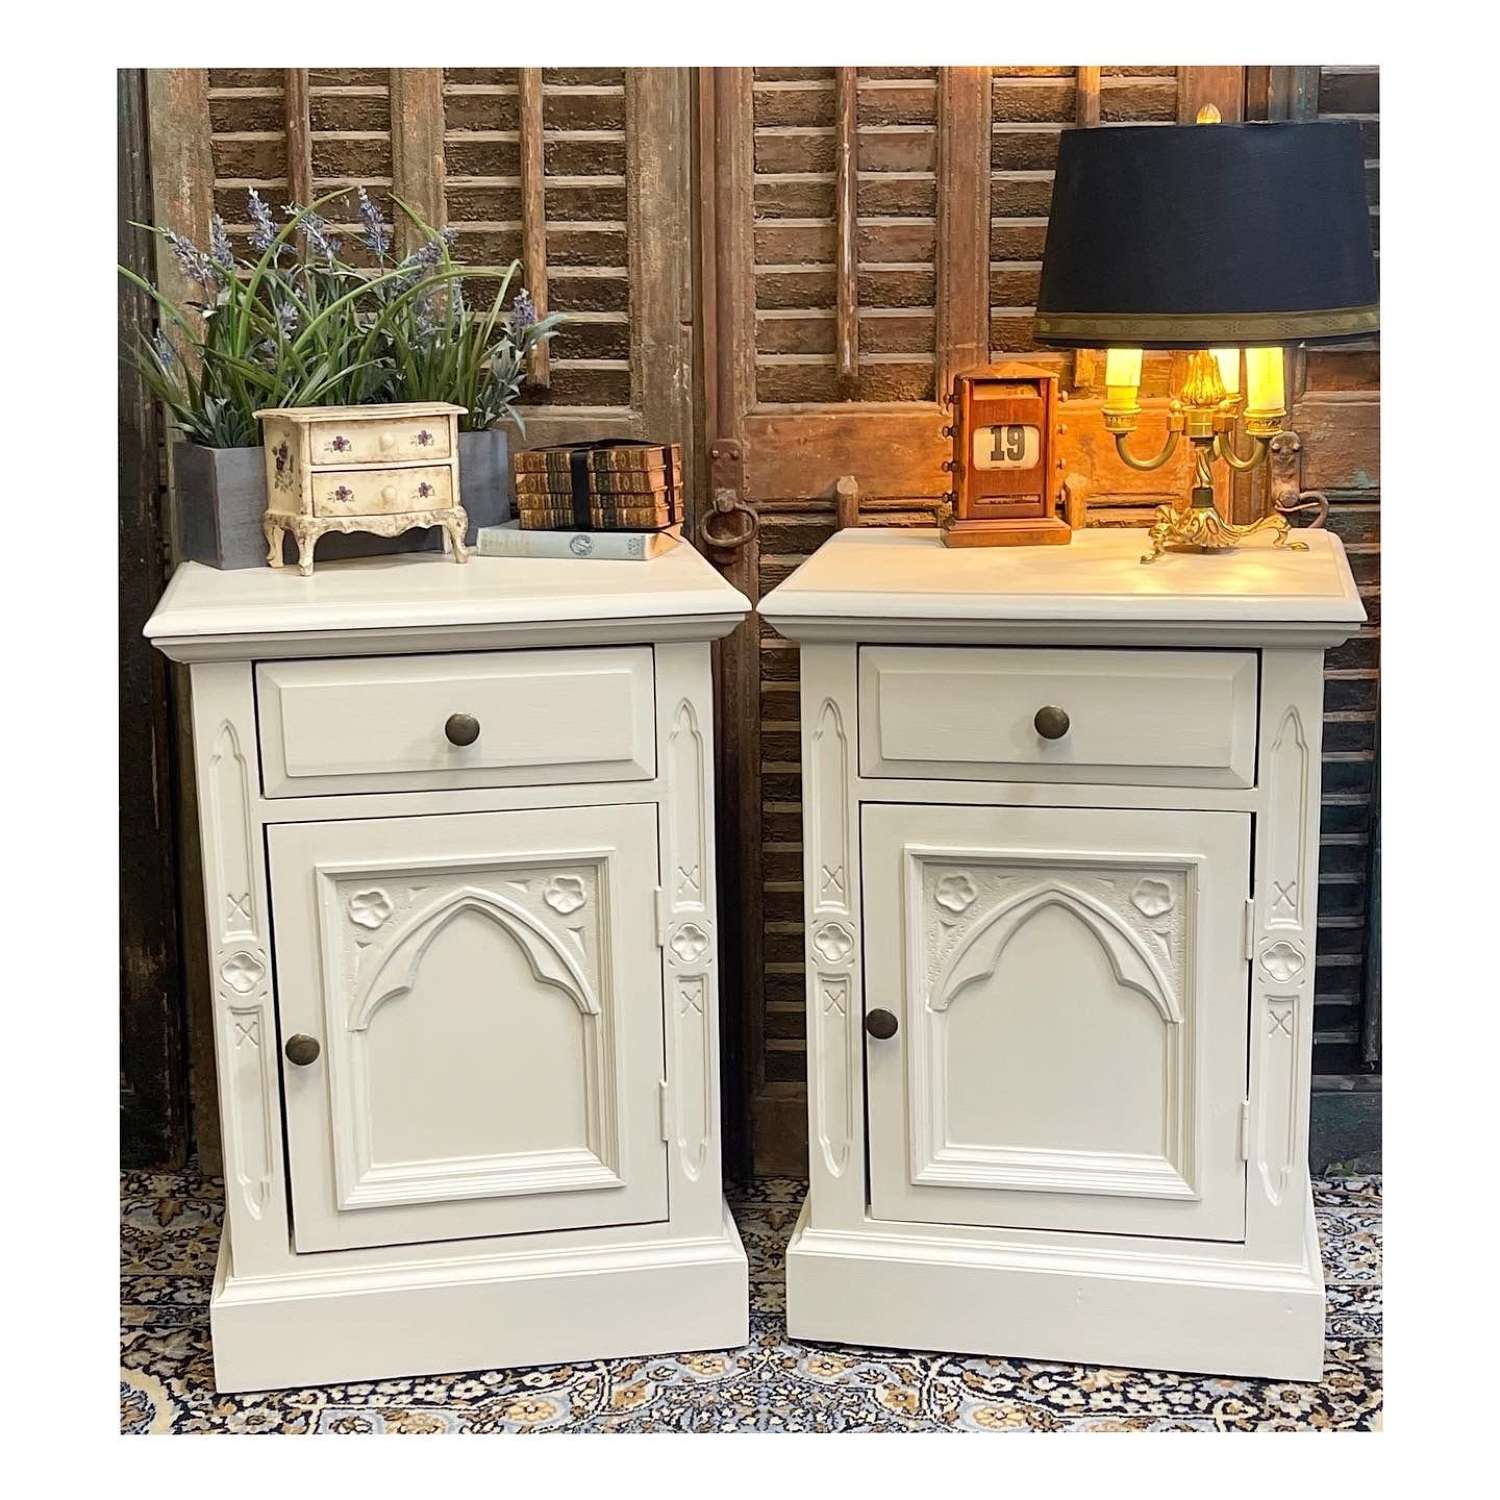 Pair of Painted Gothic Style Bedside Cabinets